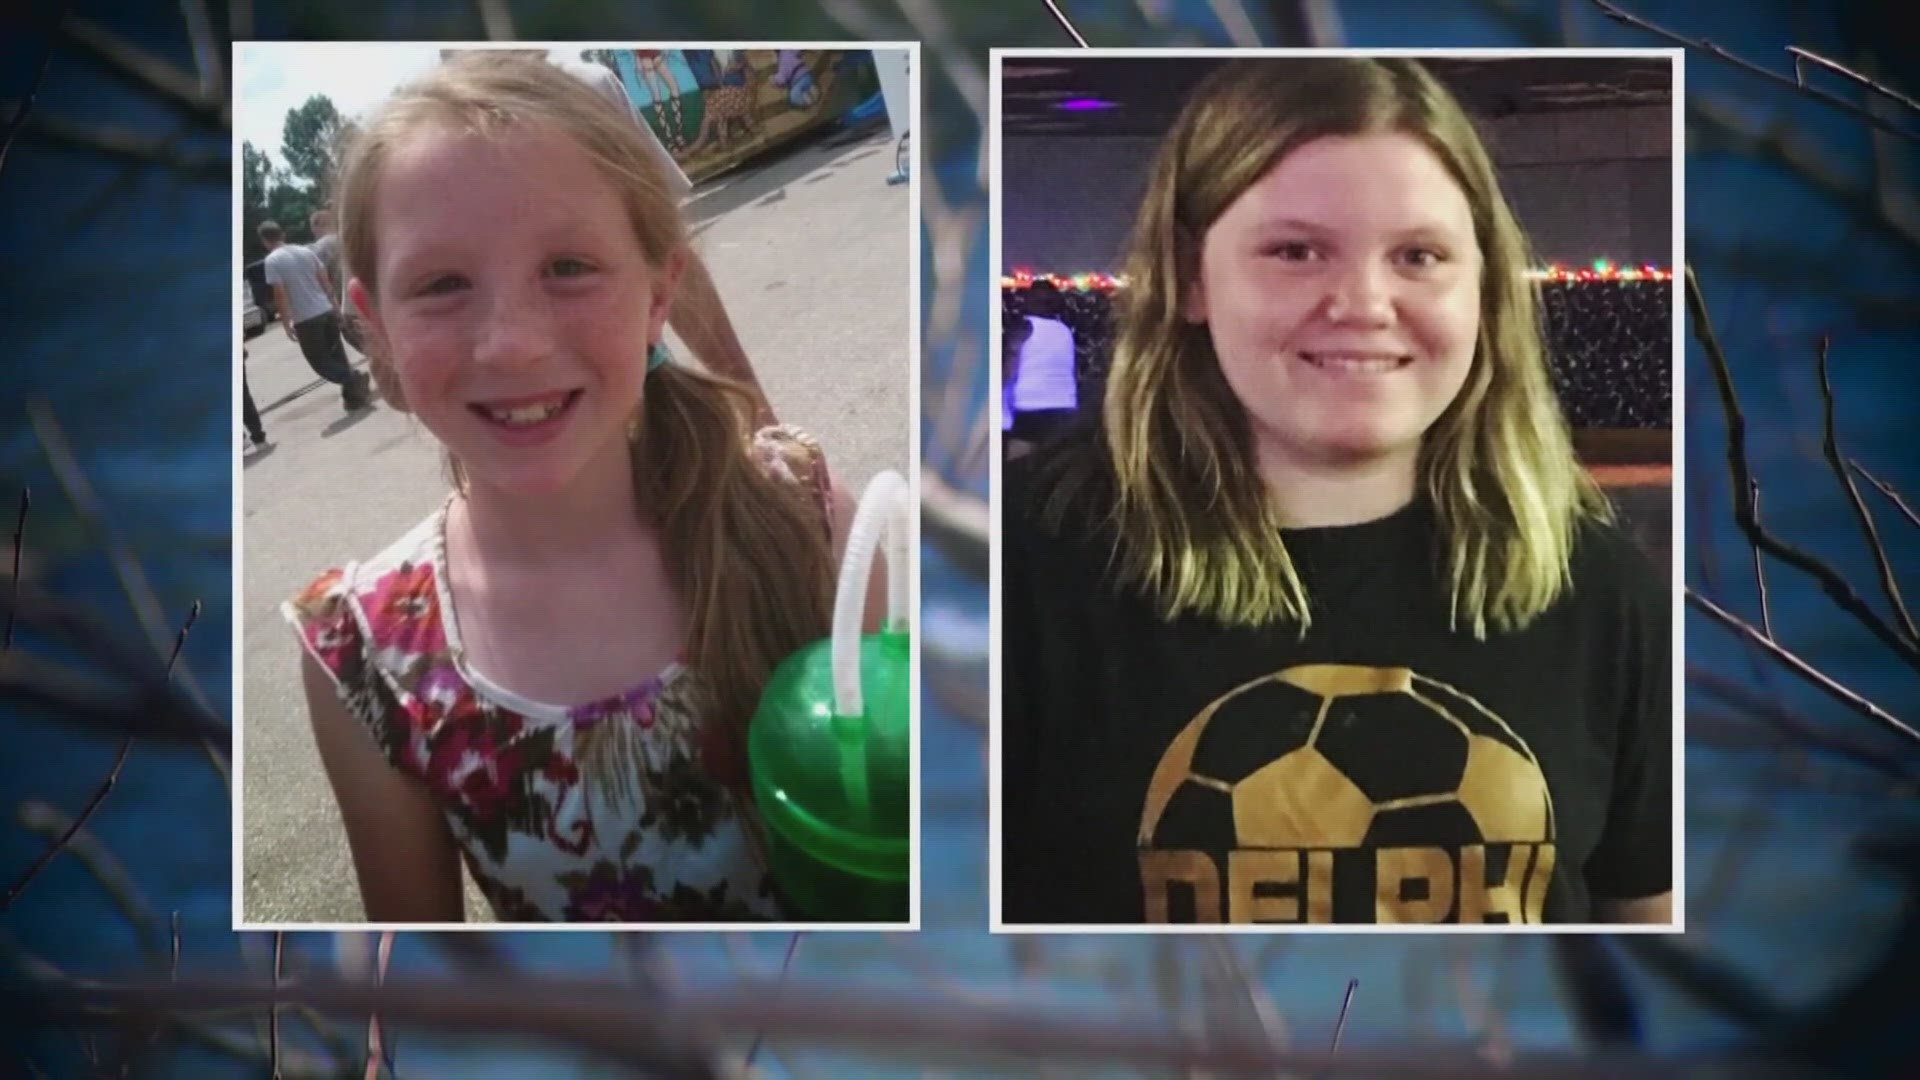 The attorneys for Richard Allen have revealed new details about the crime scene and their theory of who killed Libby German and Abby Williams.